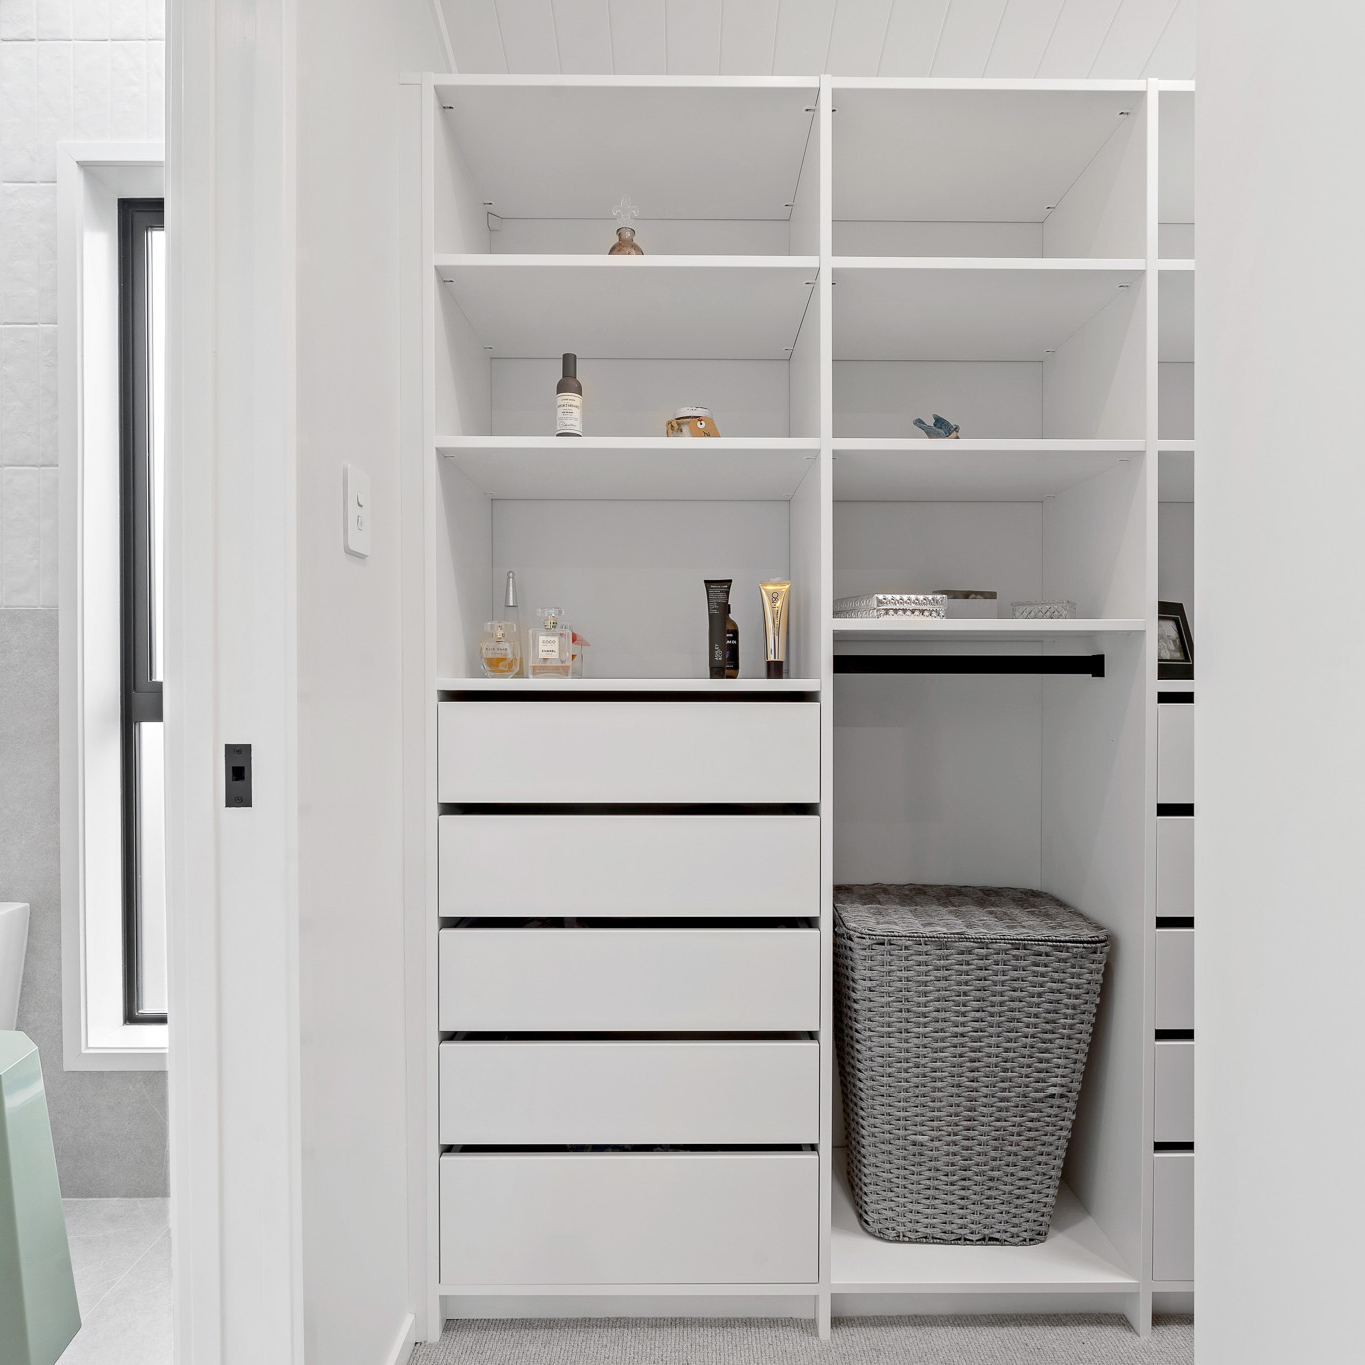 Image of White Flex wardrobe organiser walk-in, you can also see the on-suite next to it